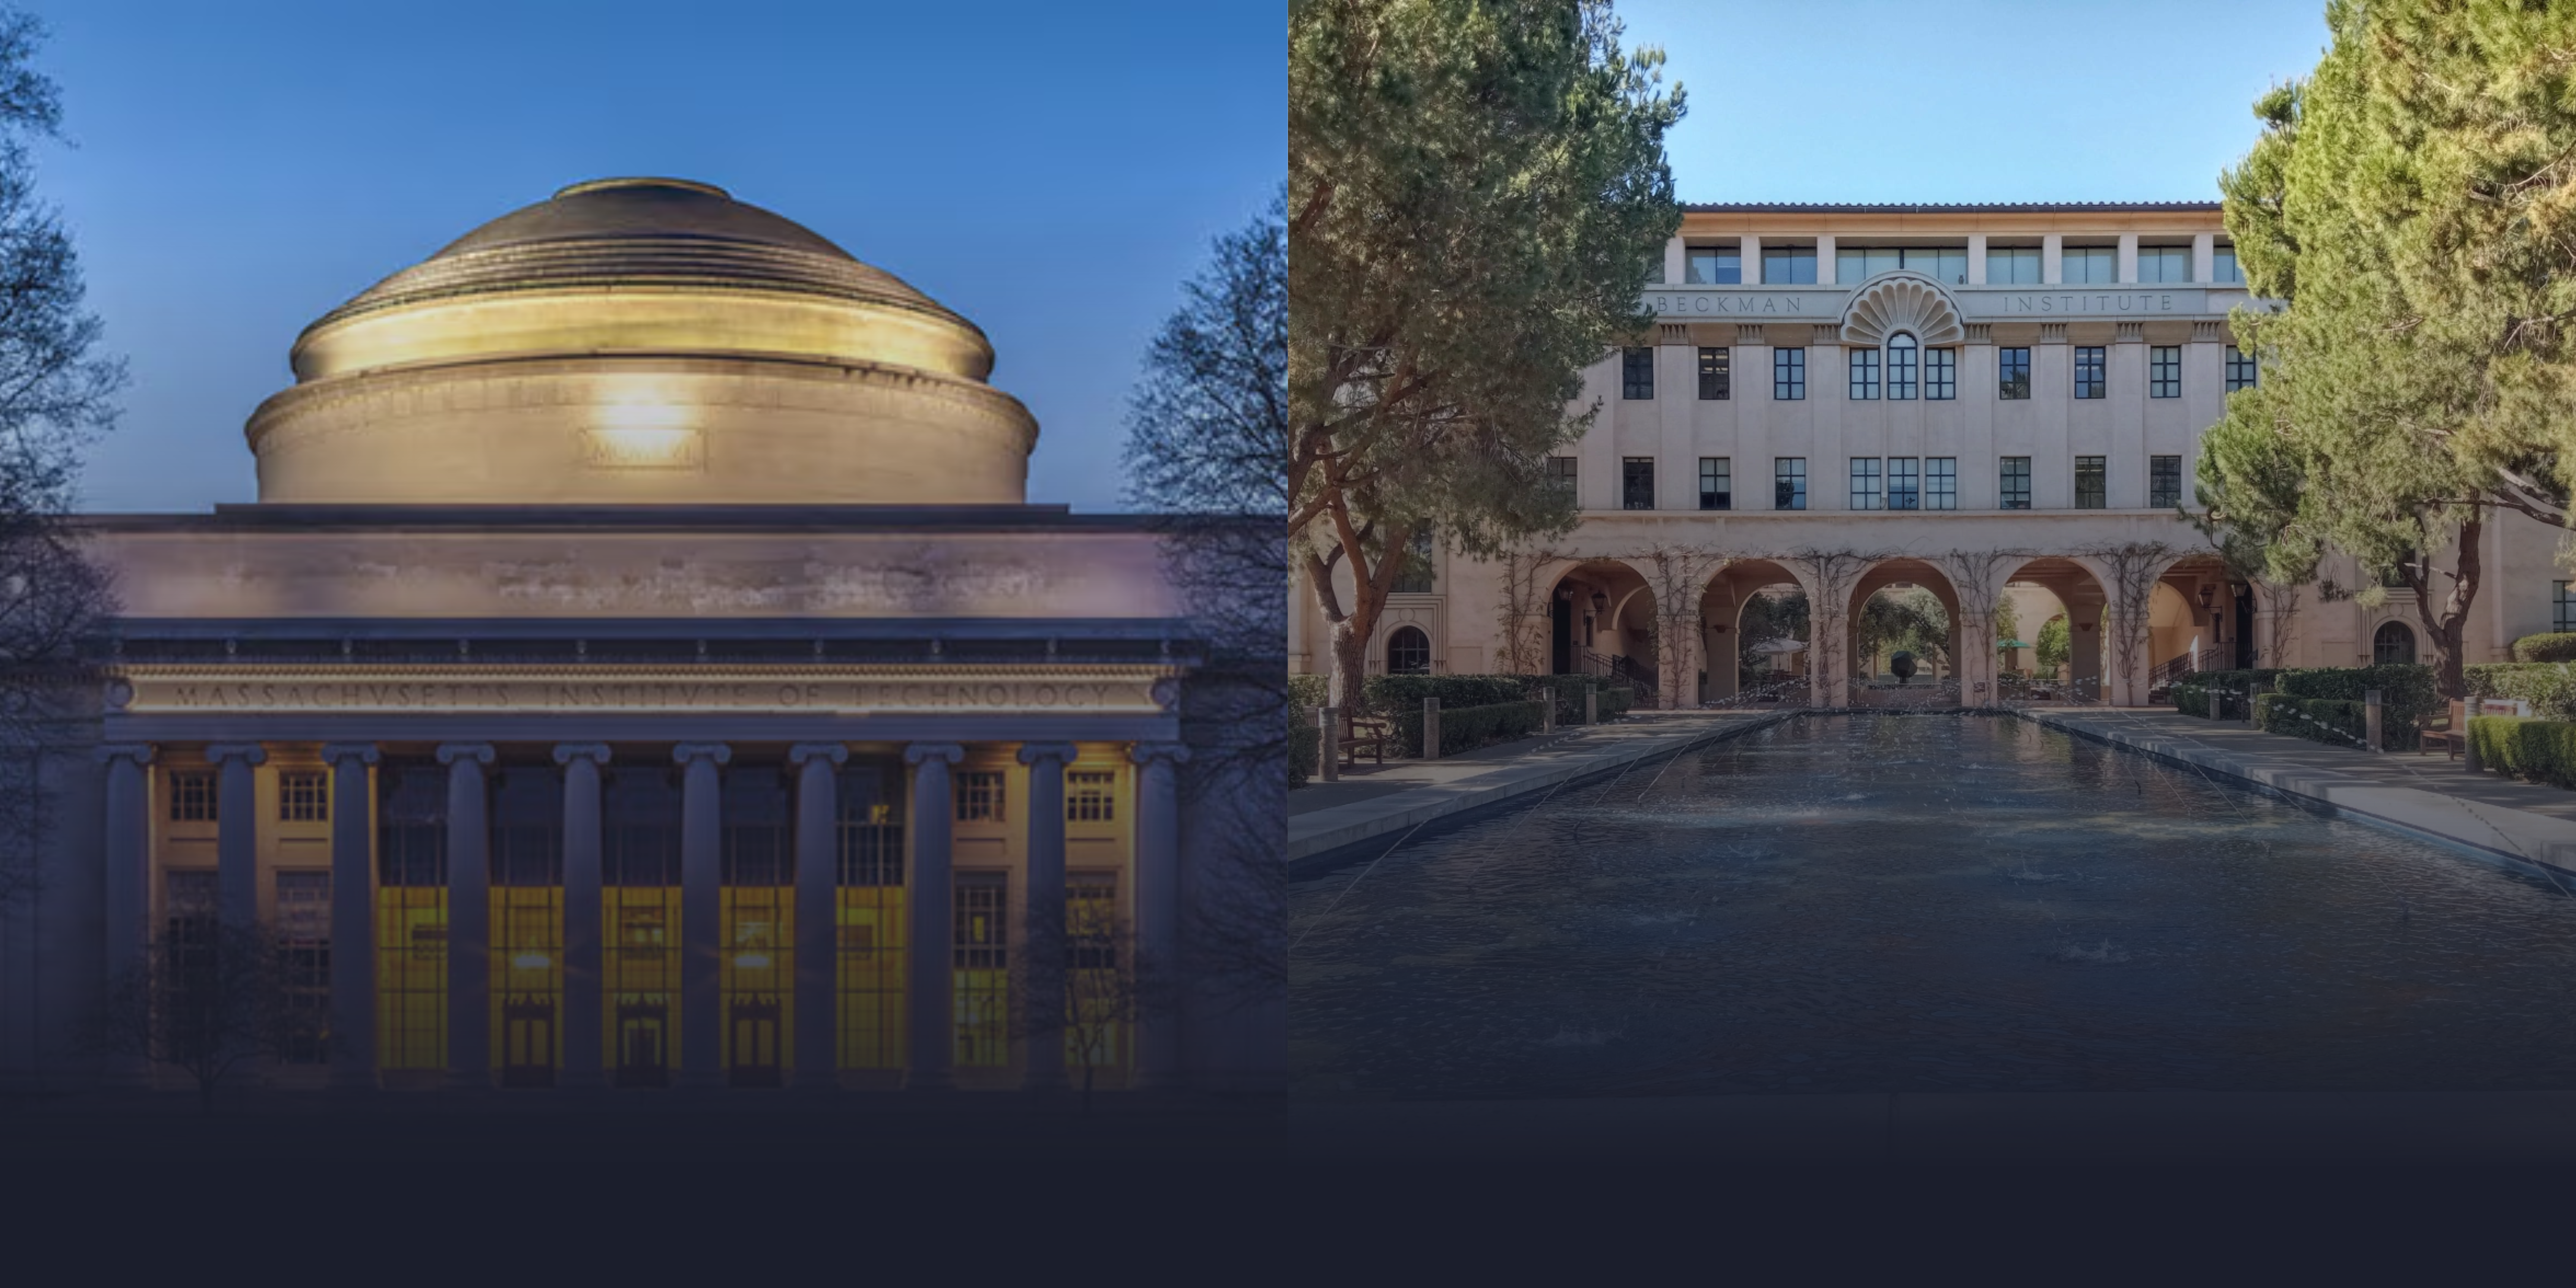 Photos of MIT and Caltech